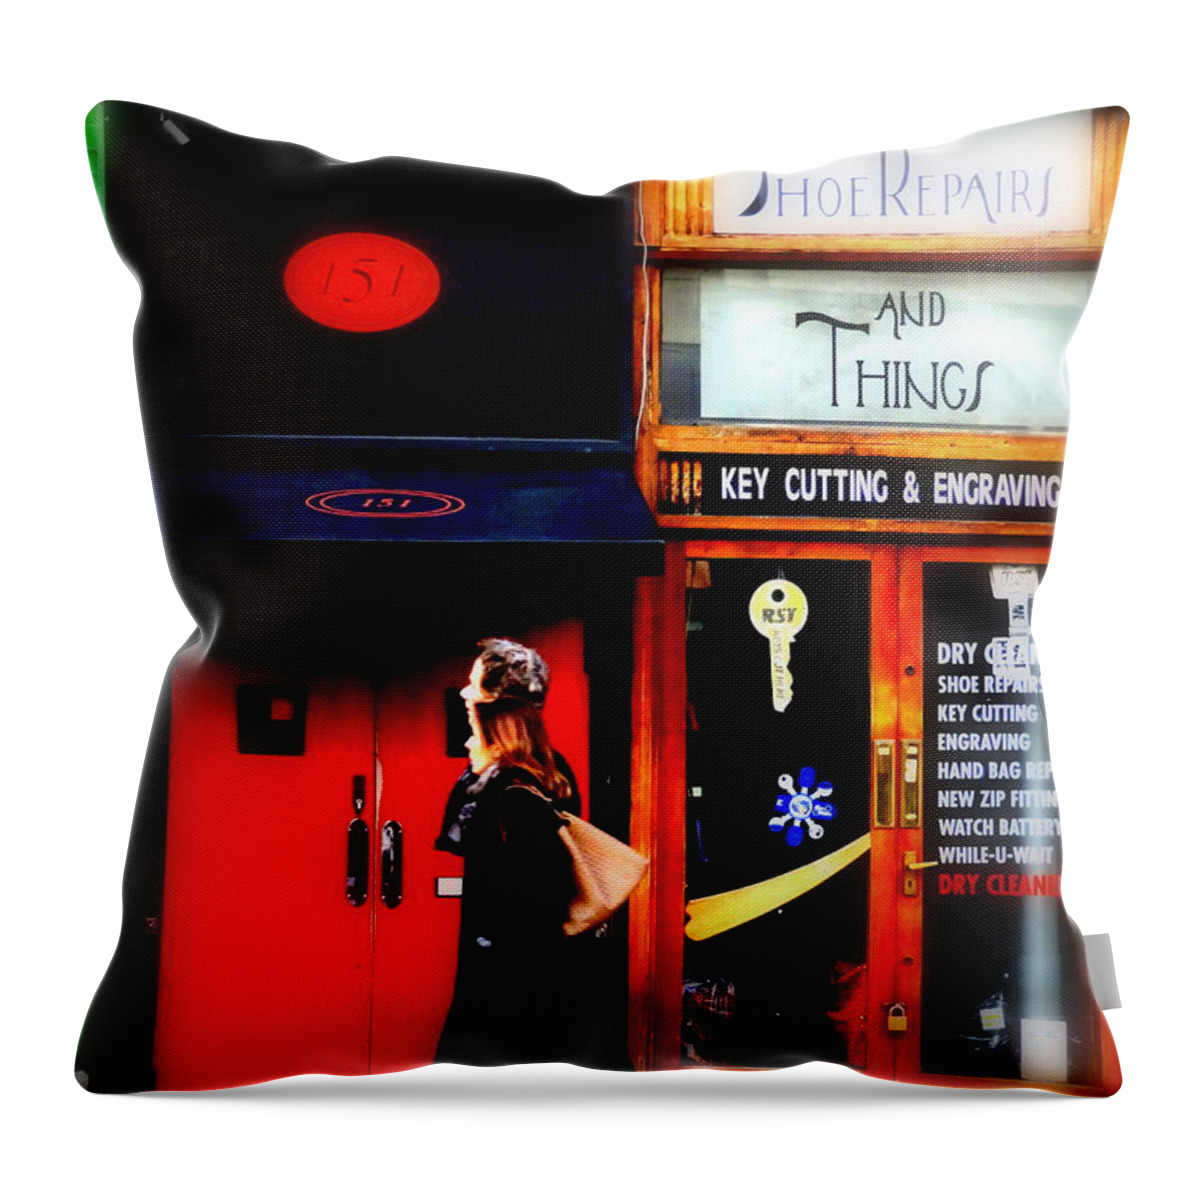 London Throw Pillow featuring the photograph Shoe Repair and Things London by Funkpix Photo Hunter